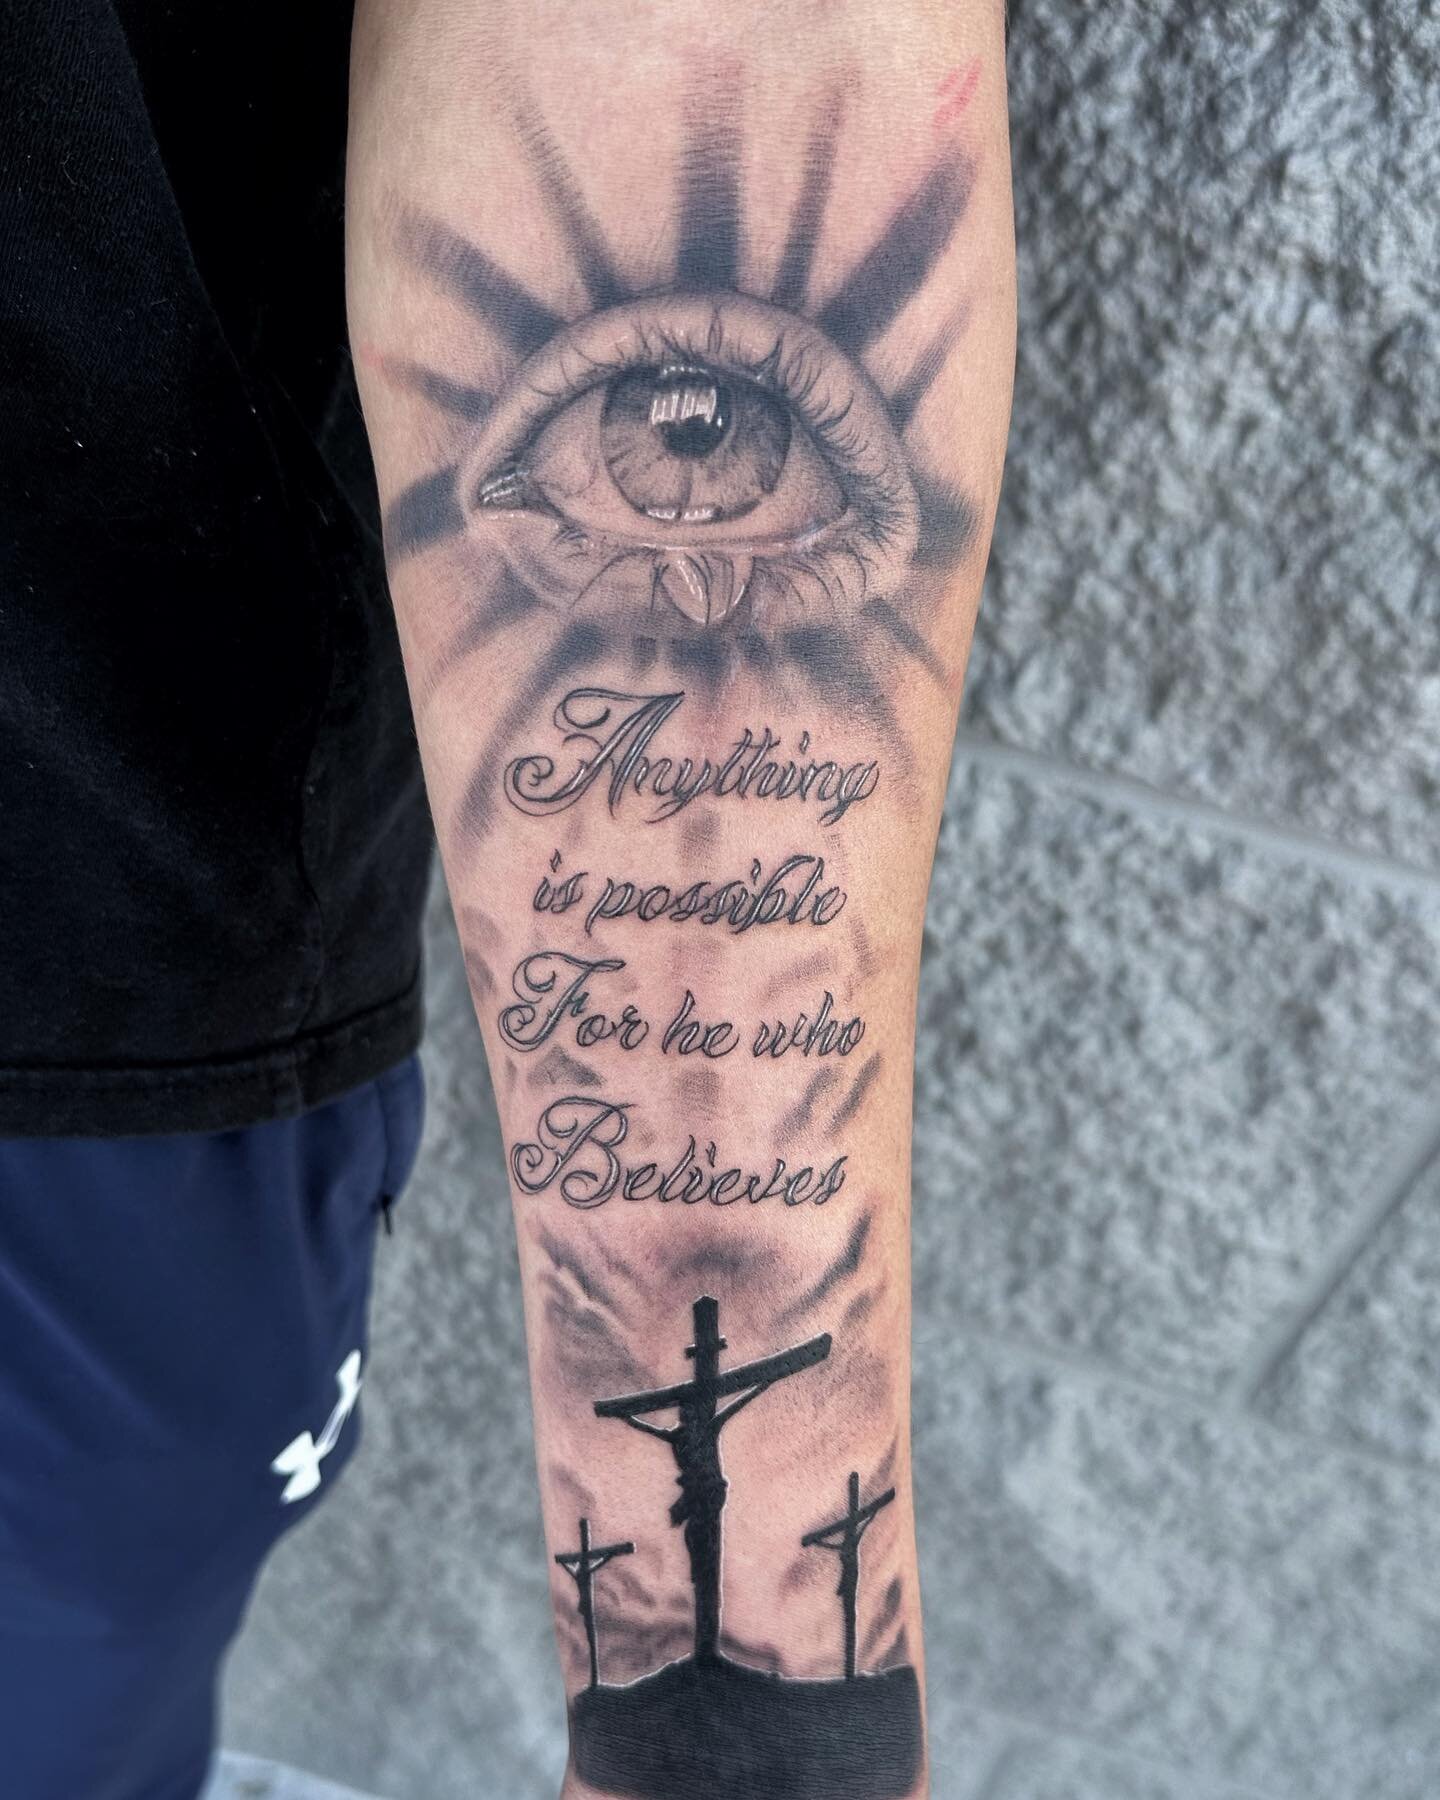 &ldquo;Anything is possible for he who believes&rdquo; 🙏🏽✨Just knocked this out, bring &lsquo;em tattoos over 😮&zwj;💨 #christian #christiantattoos #tattoo #tattooartist #realism #realismtattoo #blackandgrey #blackandgreytattoo #nwa #nwatattoo #nw